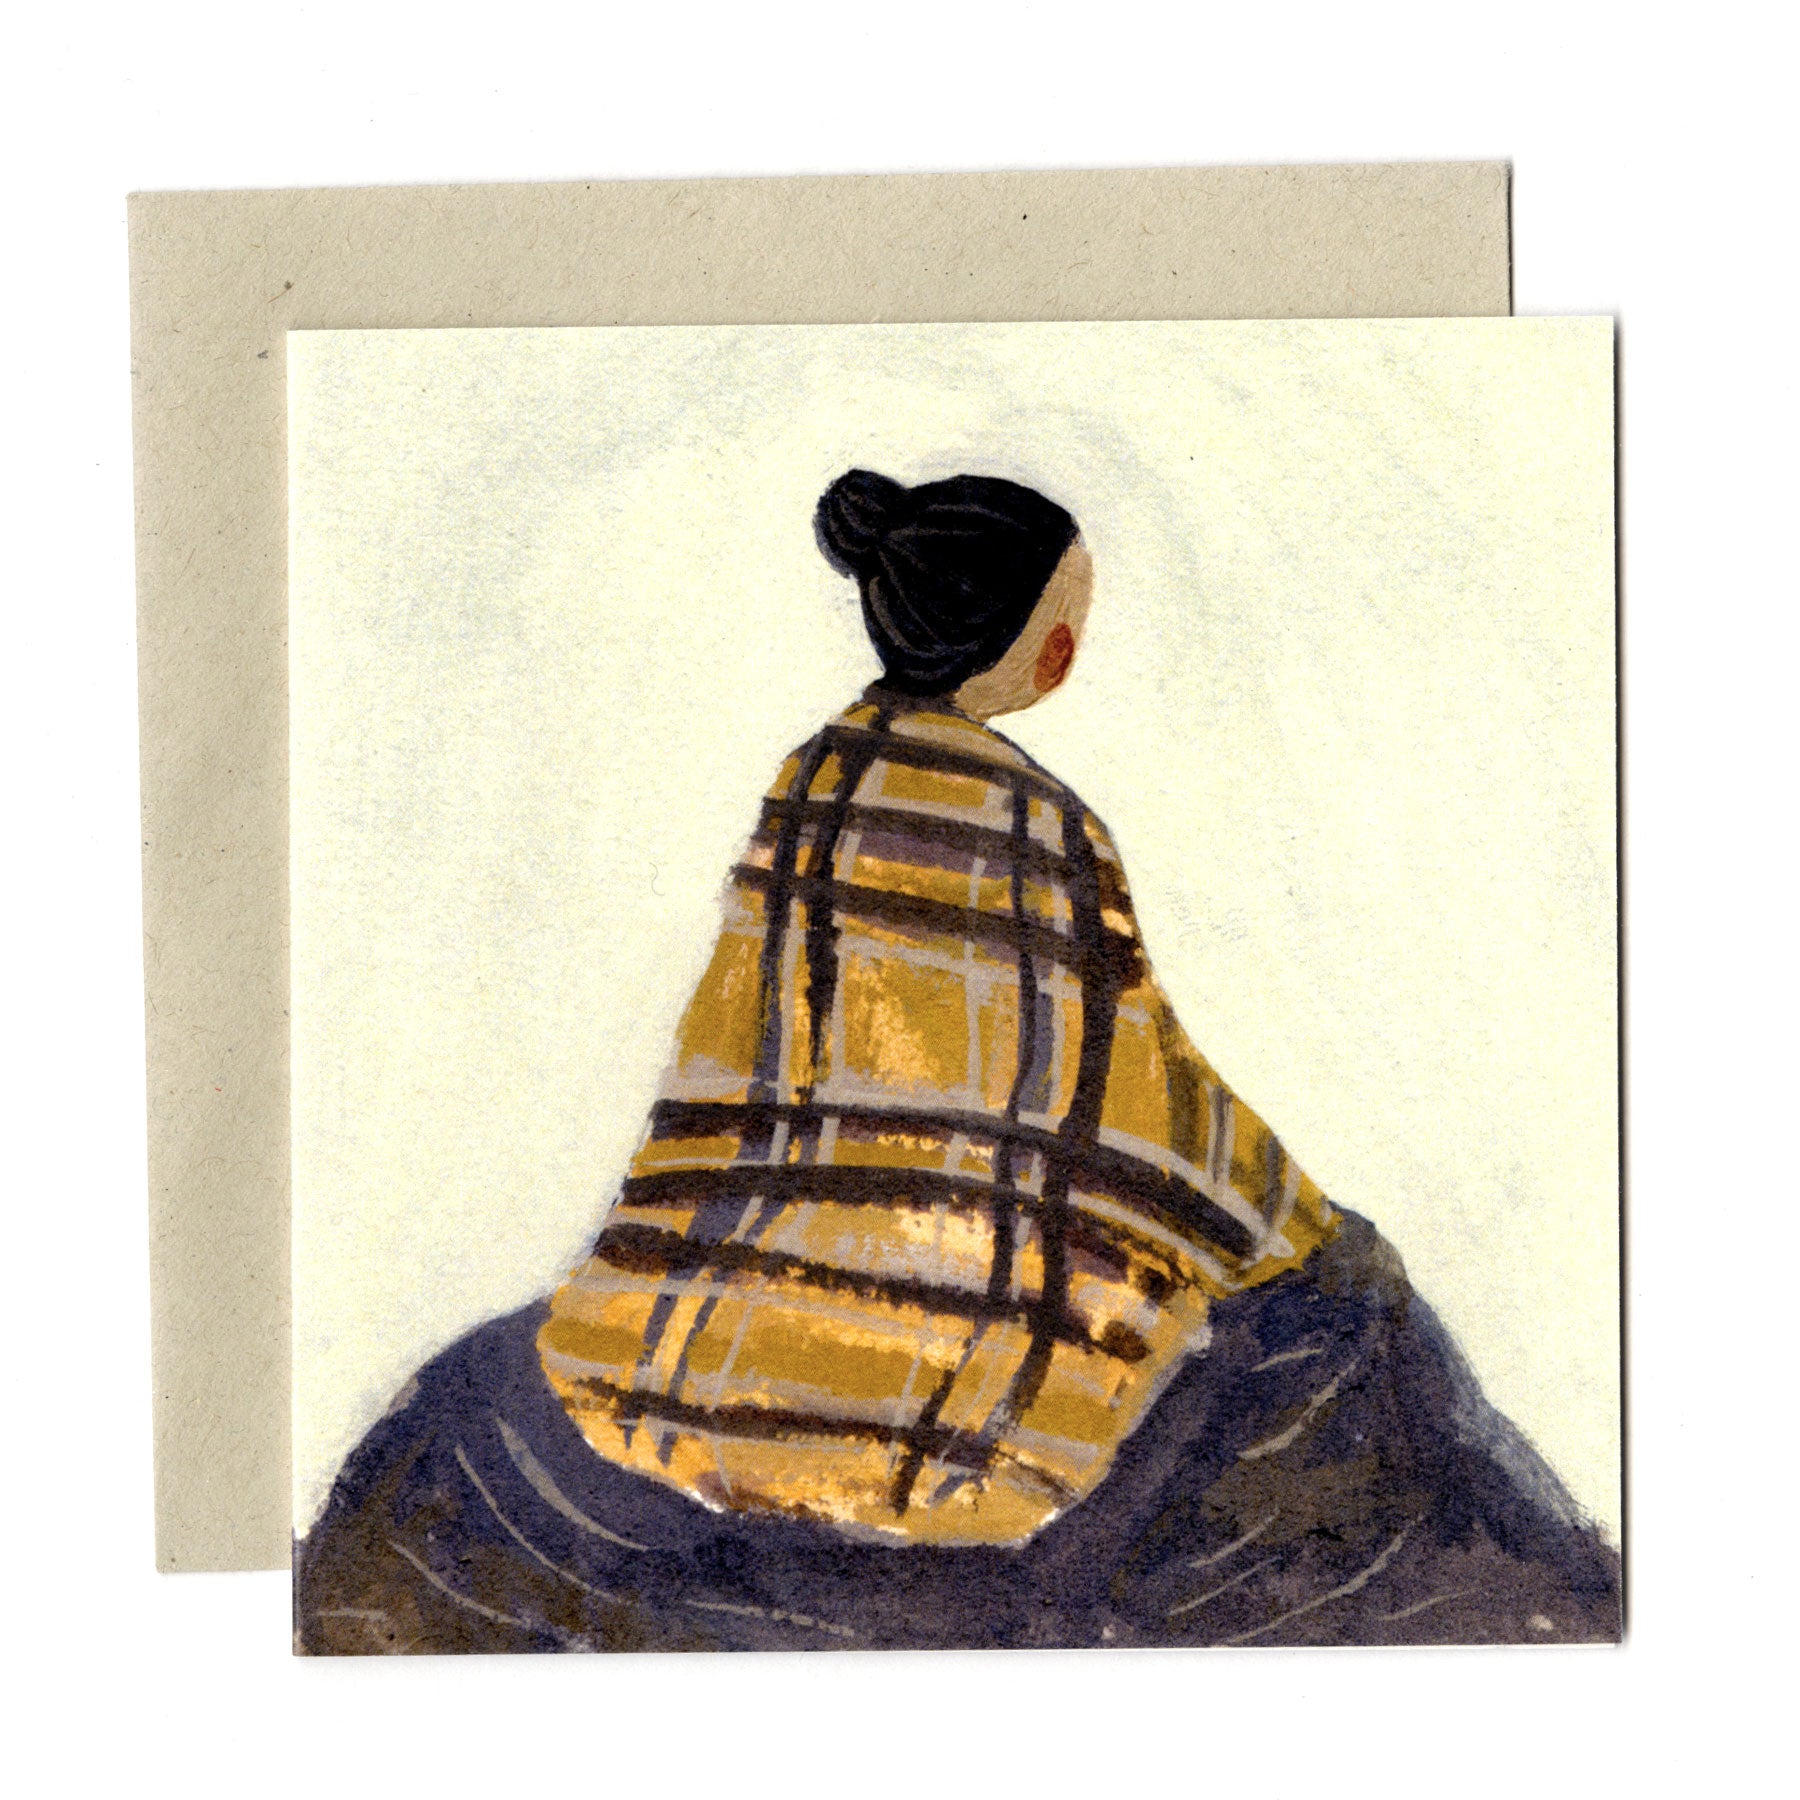 The Blanket Greeting Card